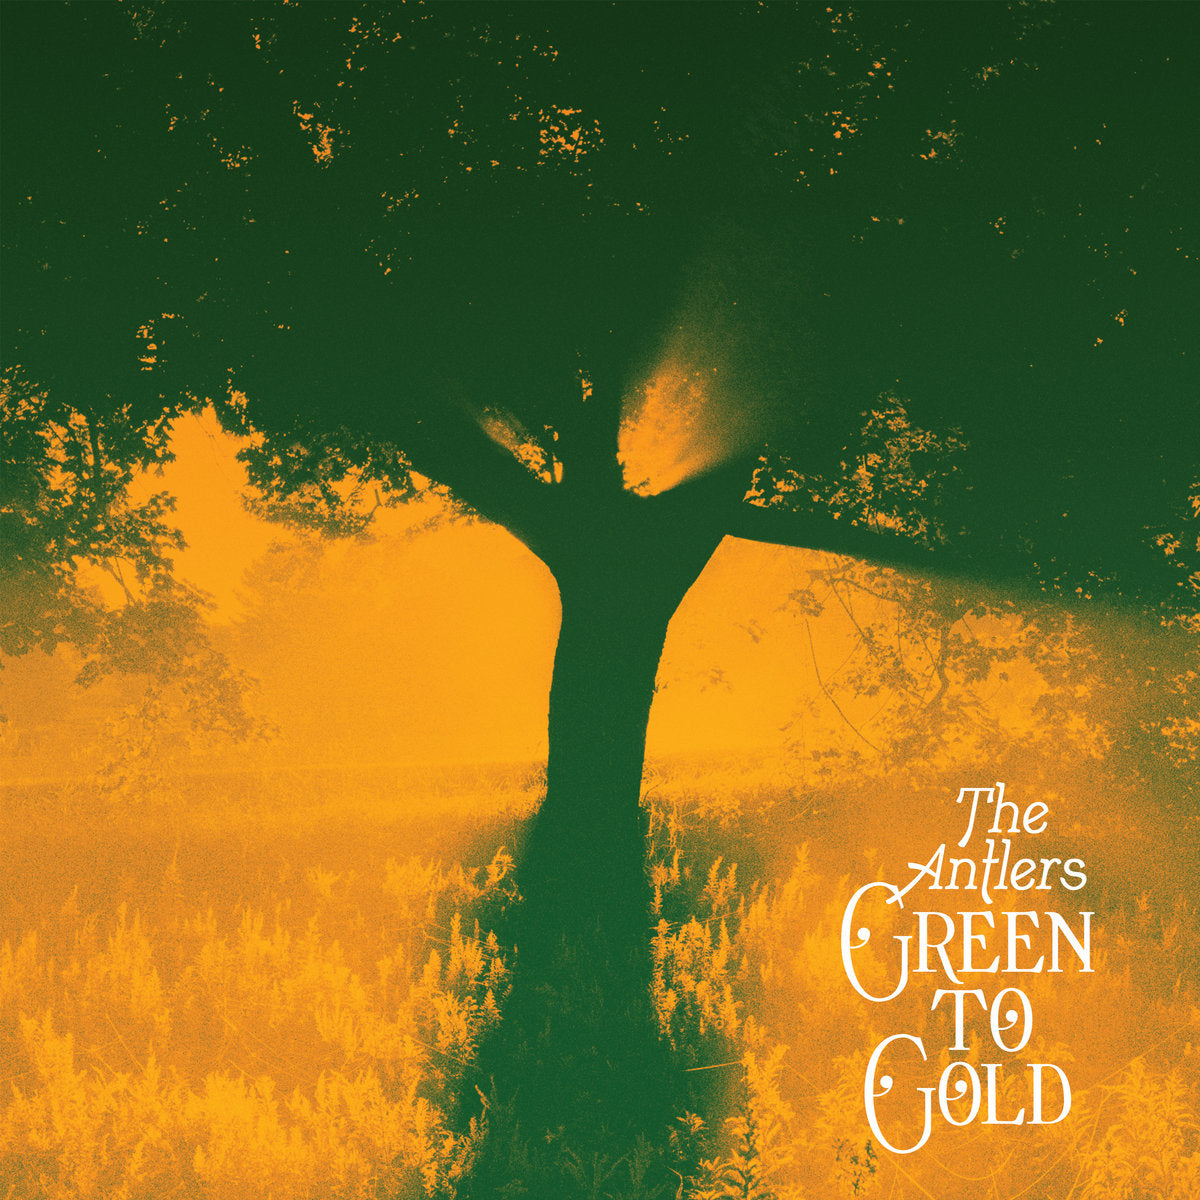 THE ANTLERS - Green To Gold - LP - Gold Vinyl